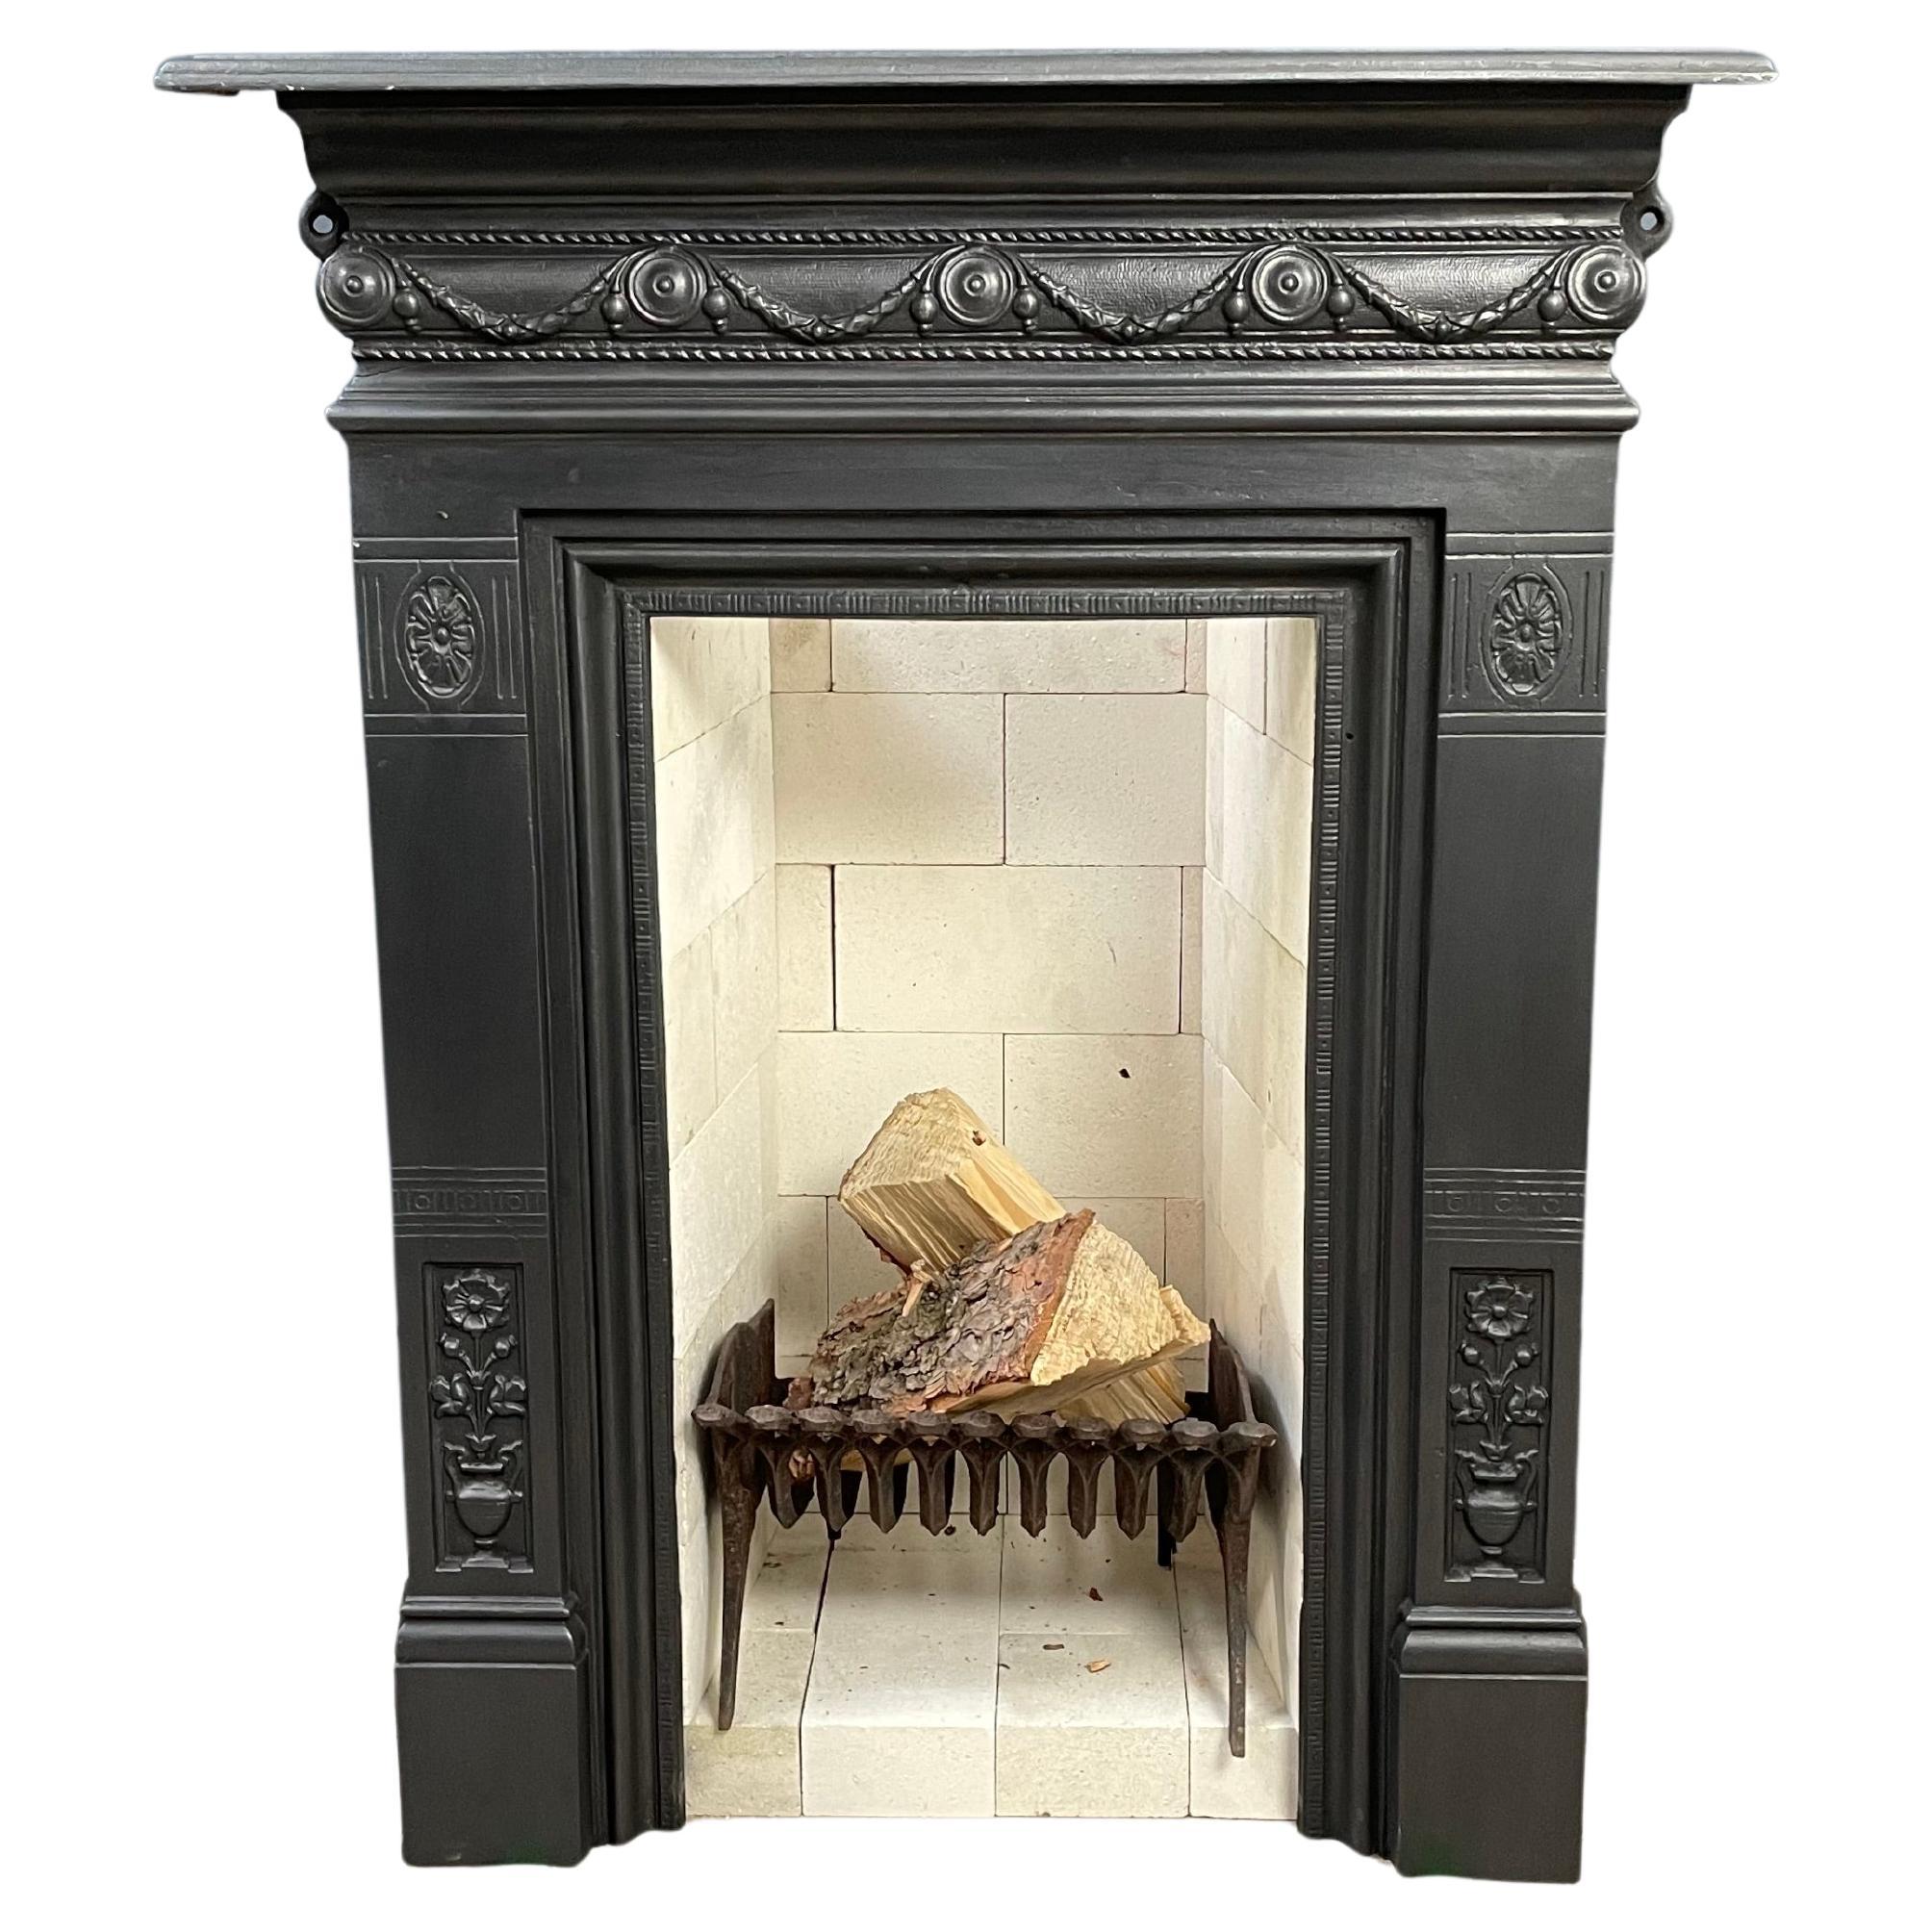 Antique English Cast Iron Fireplace Including Refractory Bricks Insert For Sale